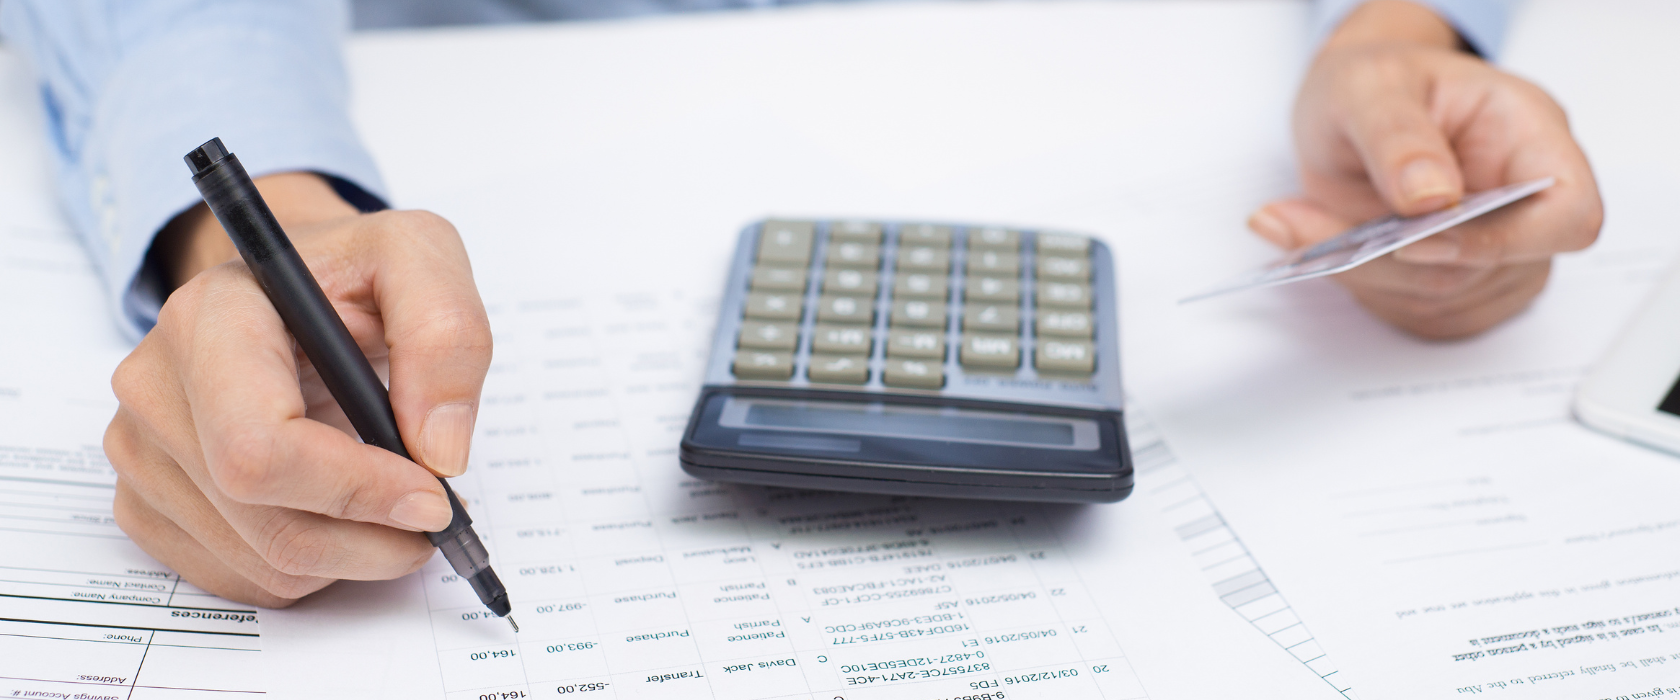 A man holding a credit or debit card using a calculator and a pen to check a bank statement.